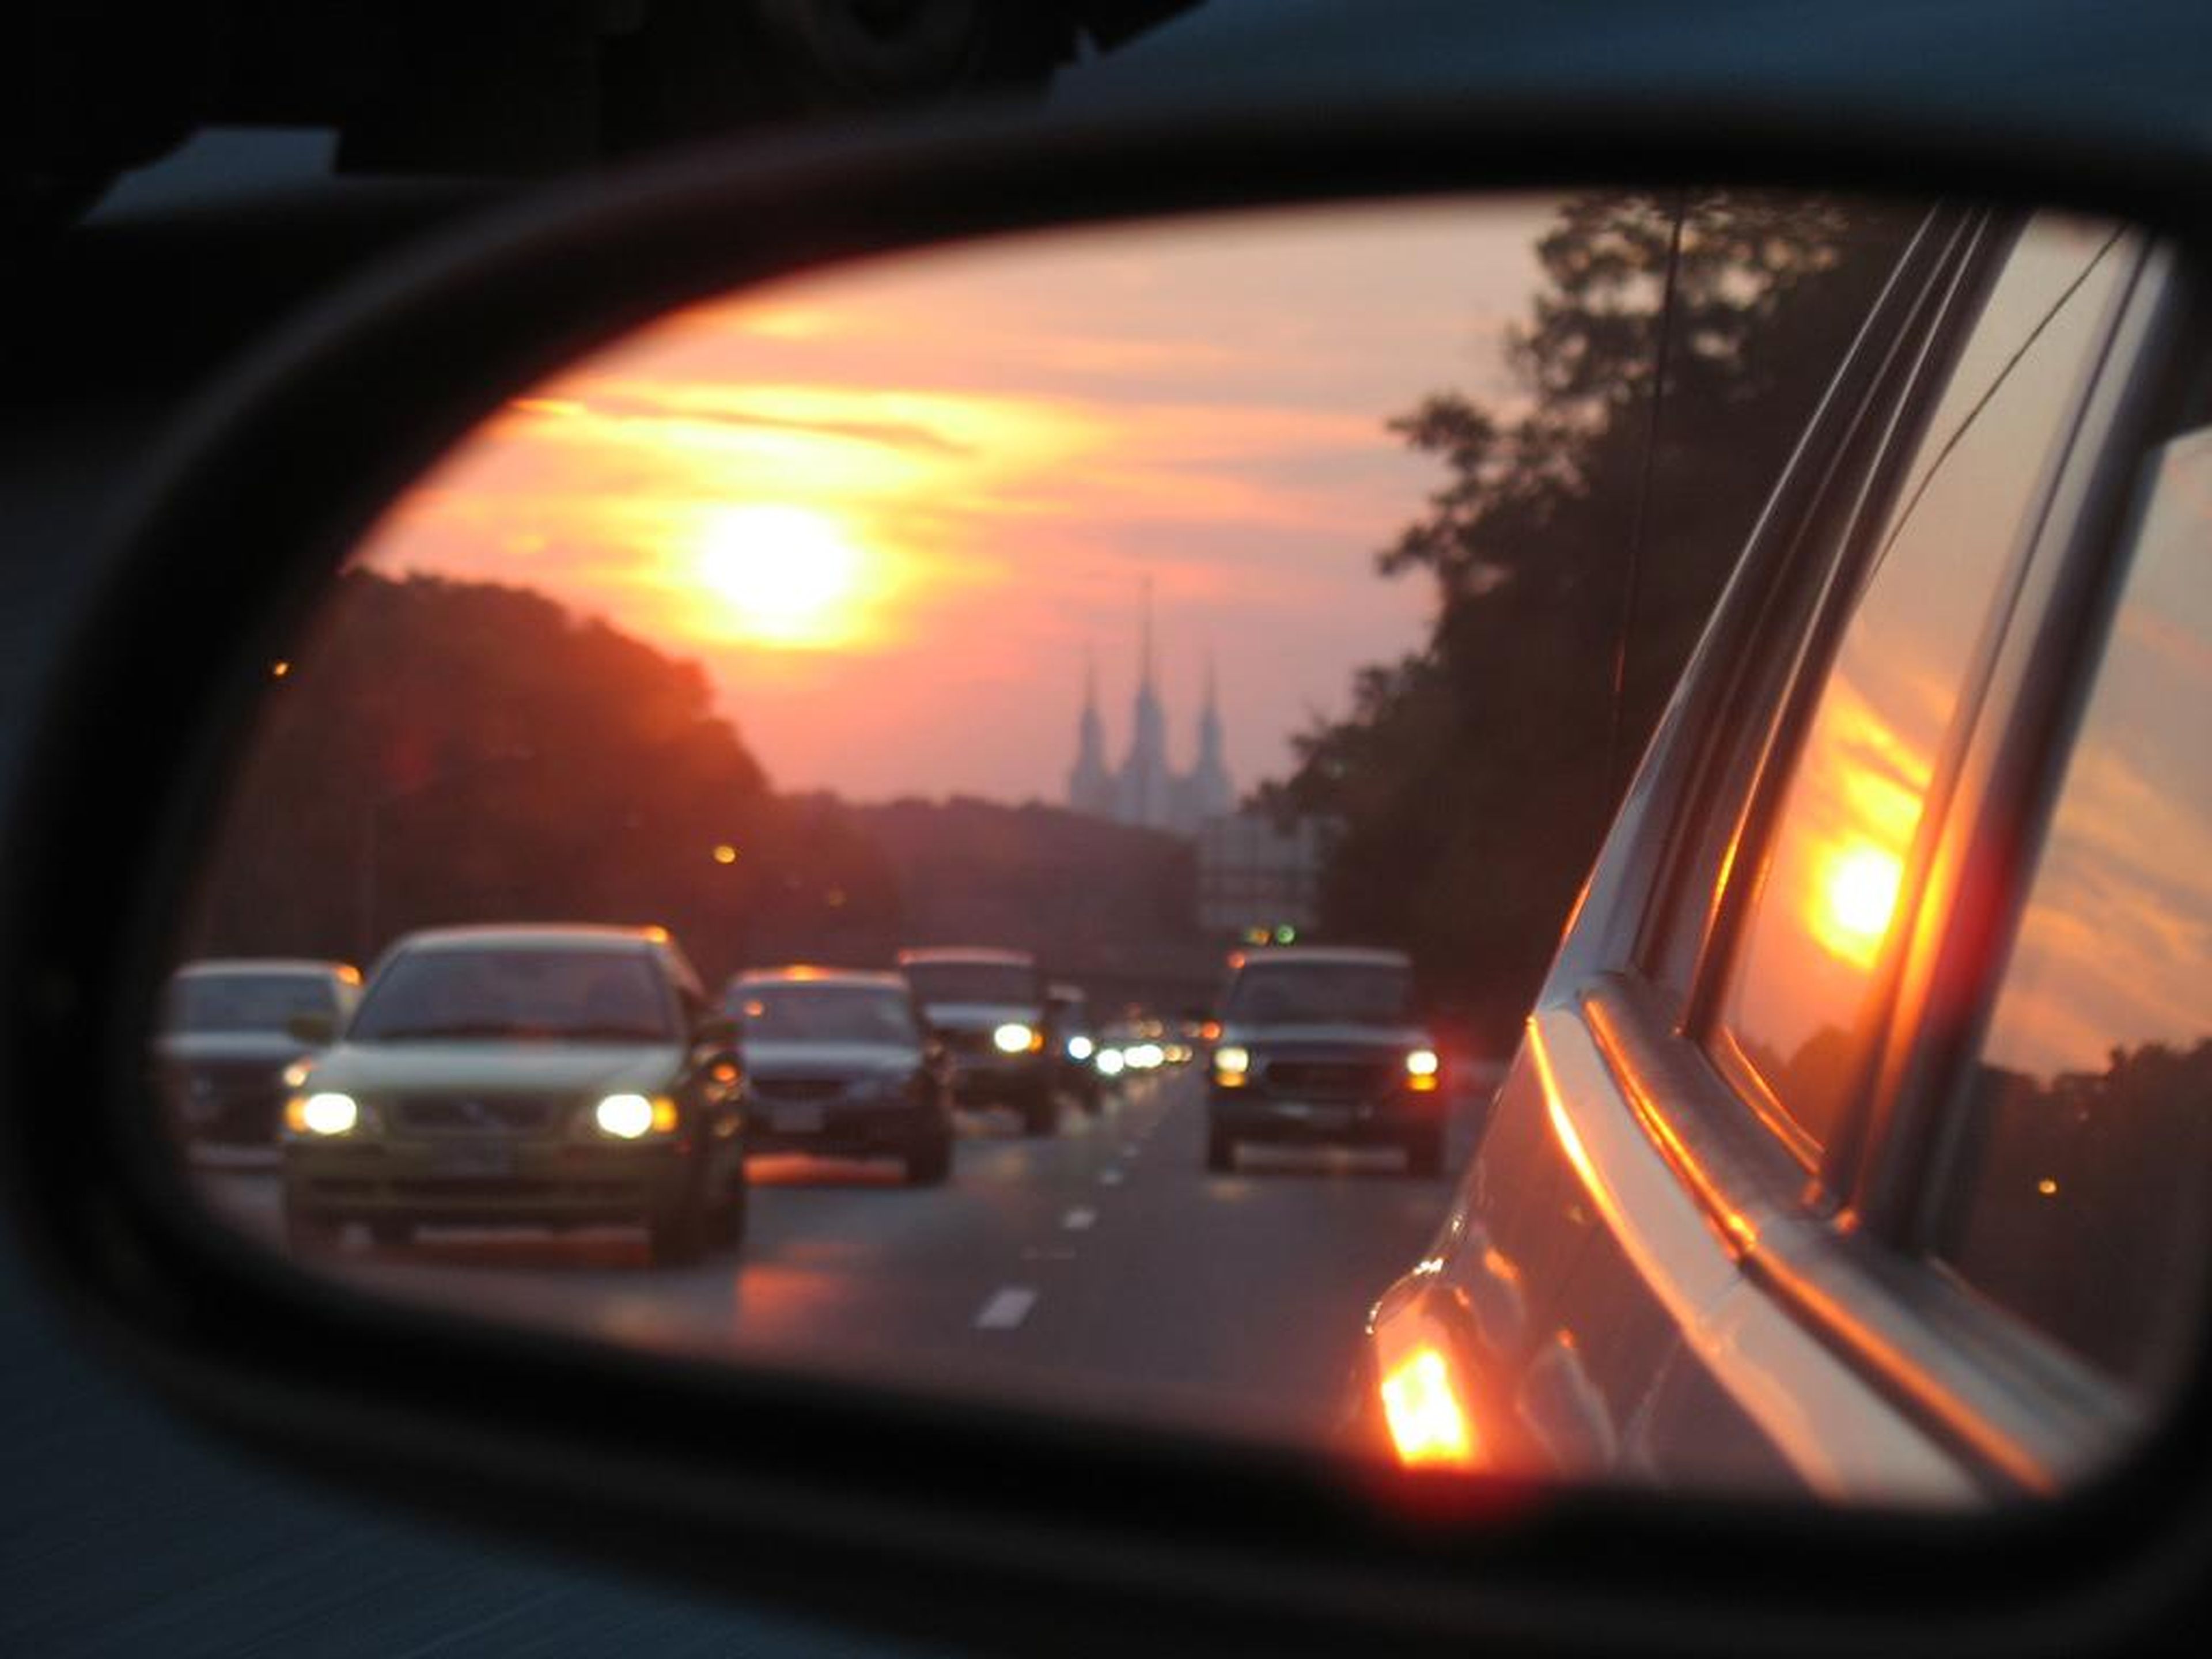 'In the business world, the rear-view mirror is always clearer than the windshield'